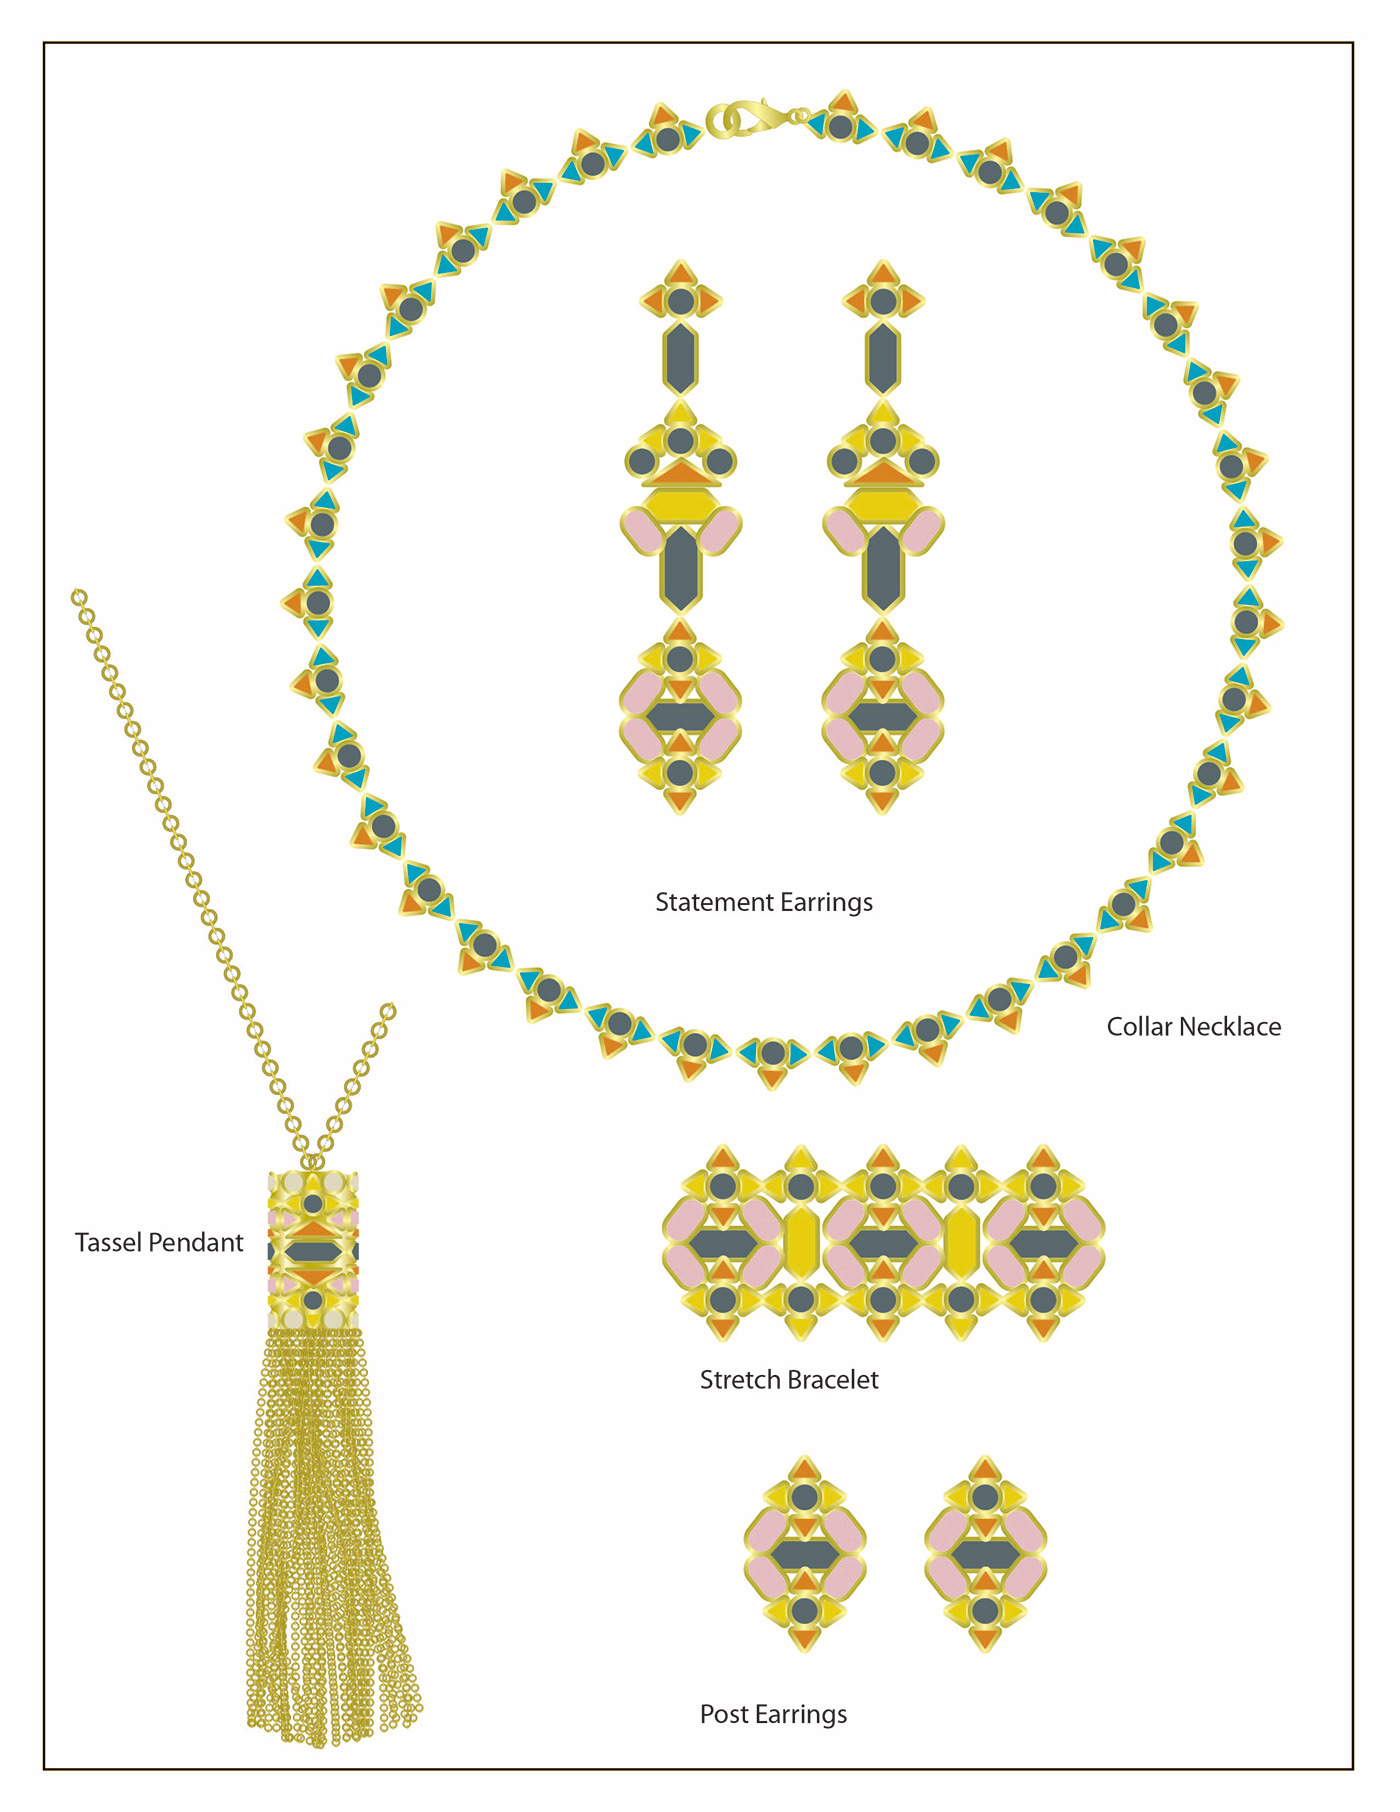 jewelry Jewelry Design  ILLUSTRATION  Illustrator commercial jewelry Fashion  fashion jewelry tassel necklace Fashion Industry product design 